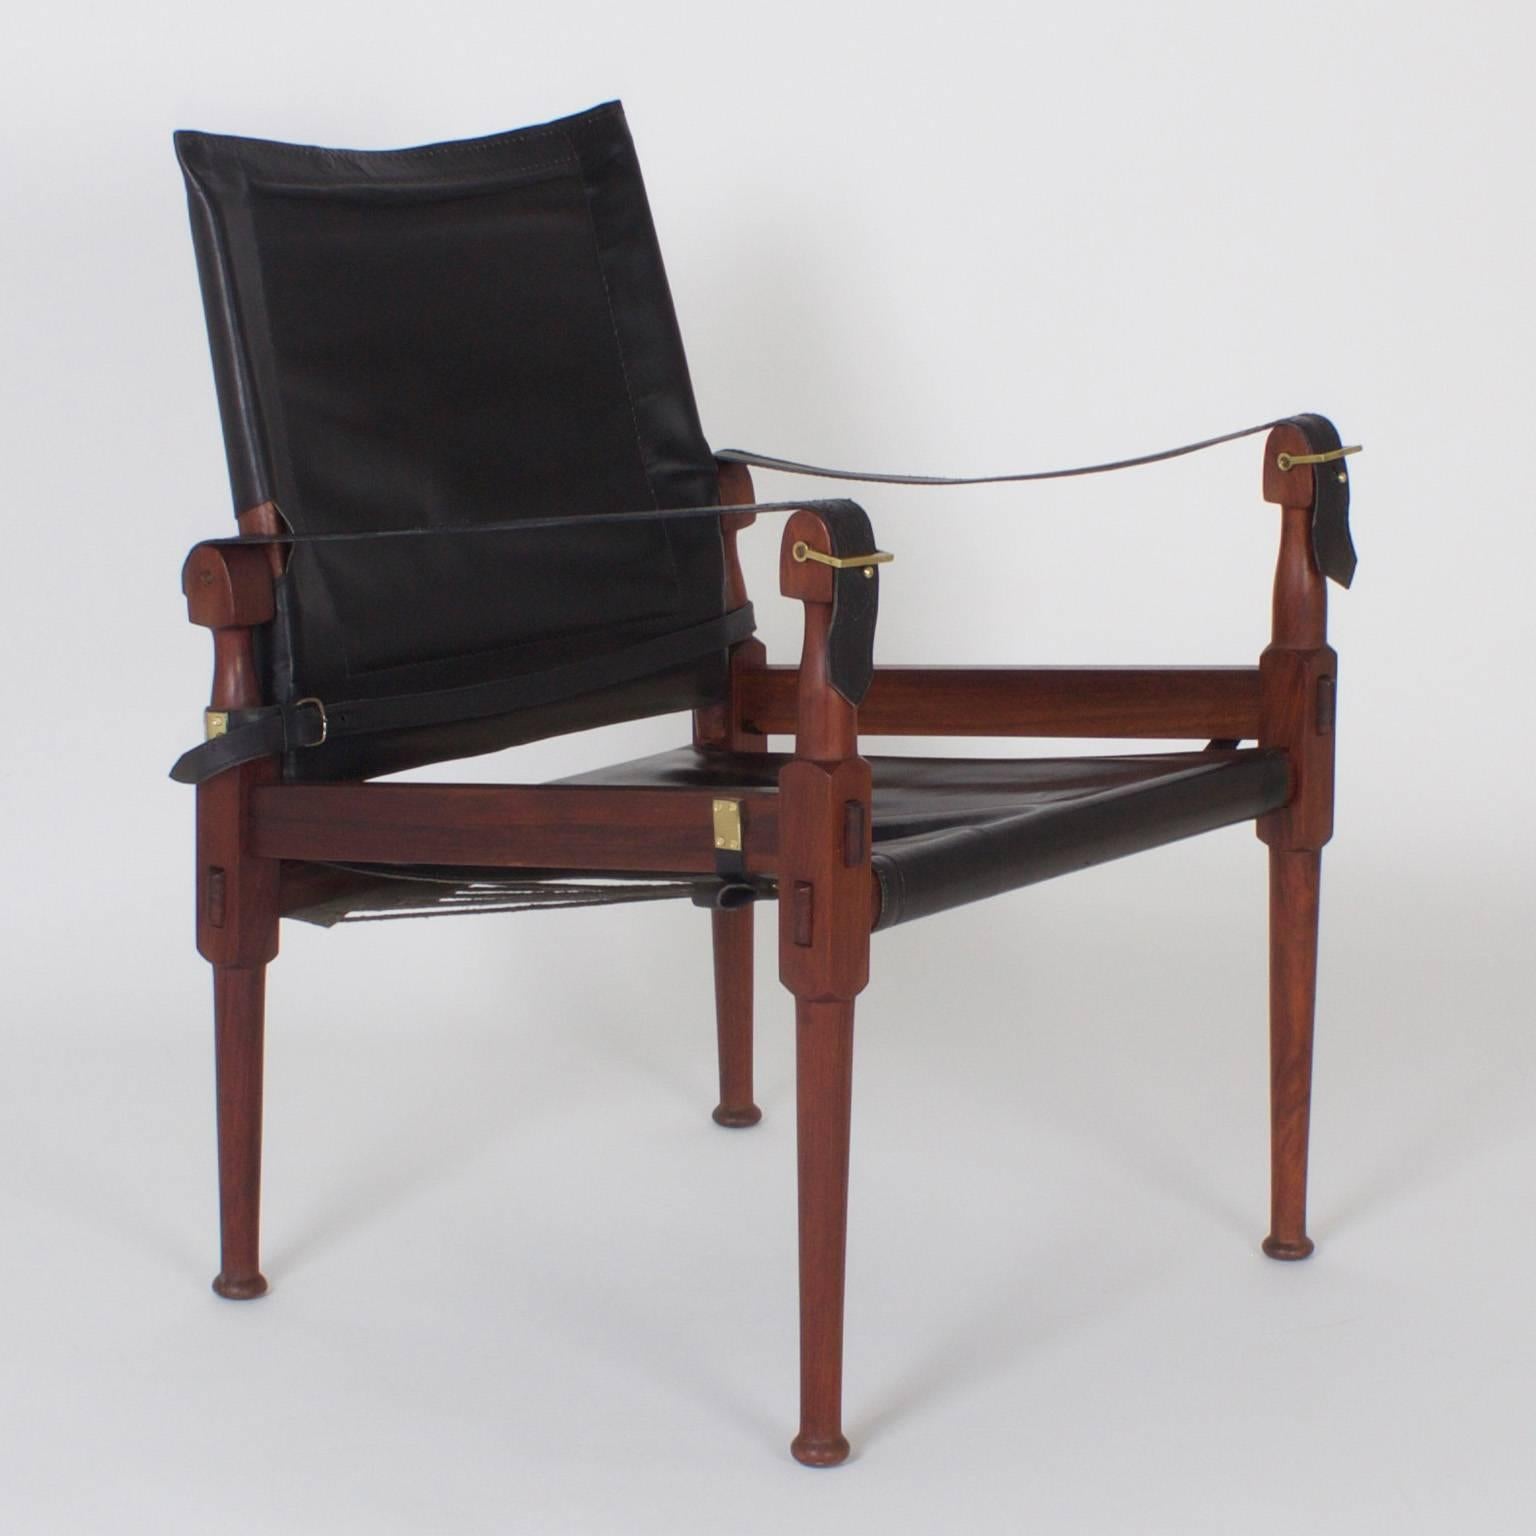 A rare set of four Safari or Campaign chairs with an easy, relaxed design. Crafted in the Mid-Century in Pakistan from rosewood. The sling style arms, seat and adjustable back are luxurious, soft black leather. All four chairs signed 